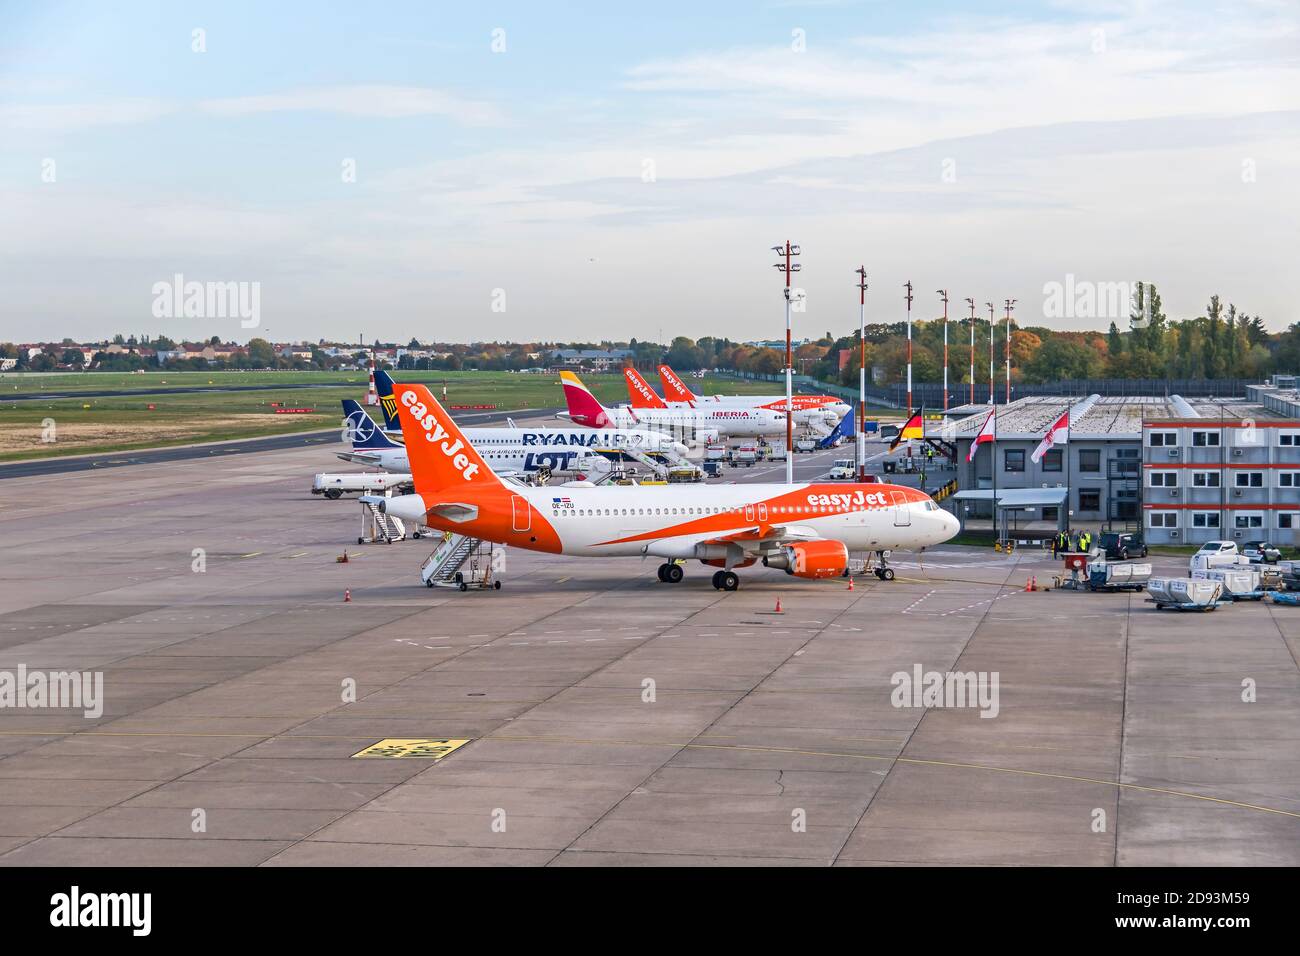 Berlin, Germany - October 22, 2020: Berlin-Tegel Otto Lilienthal main international airport (due to permanently close) with the last planes of Easyjet Stock Photo